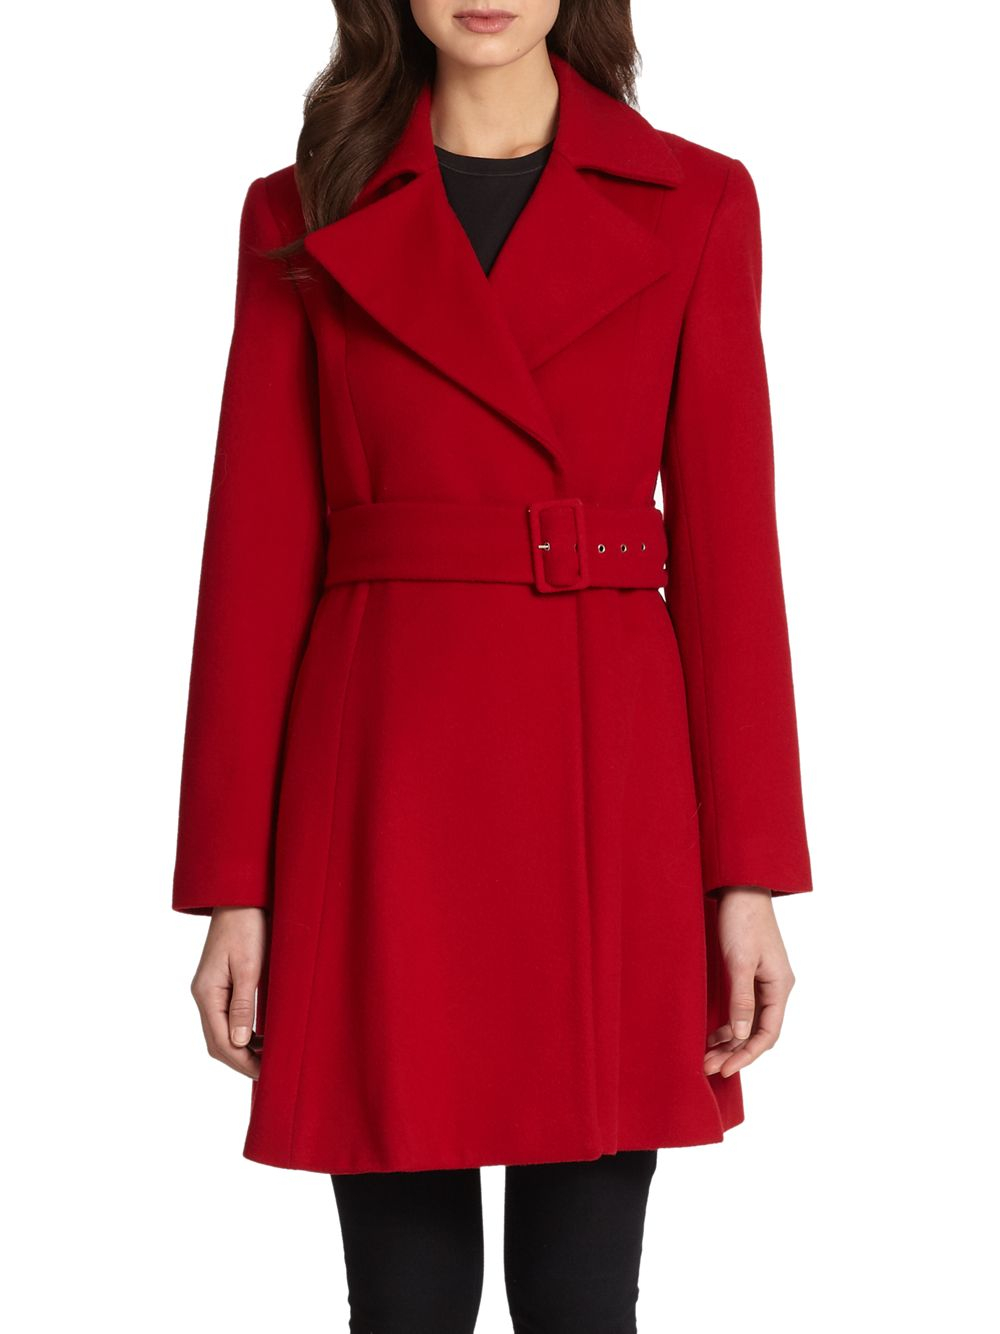 Sofia cashmere Wool Cashmere Belted Coat in Red | Lyst